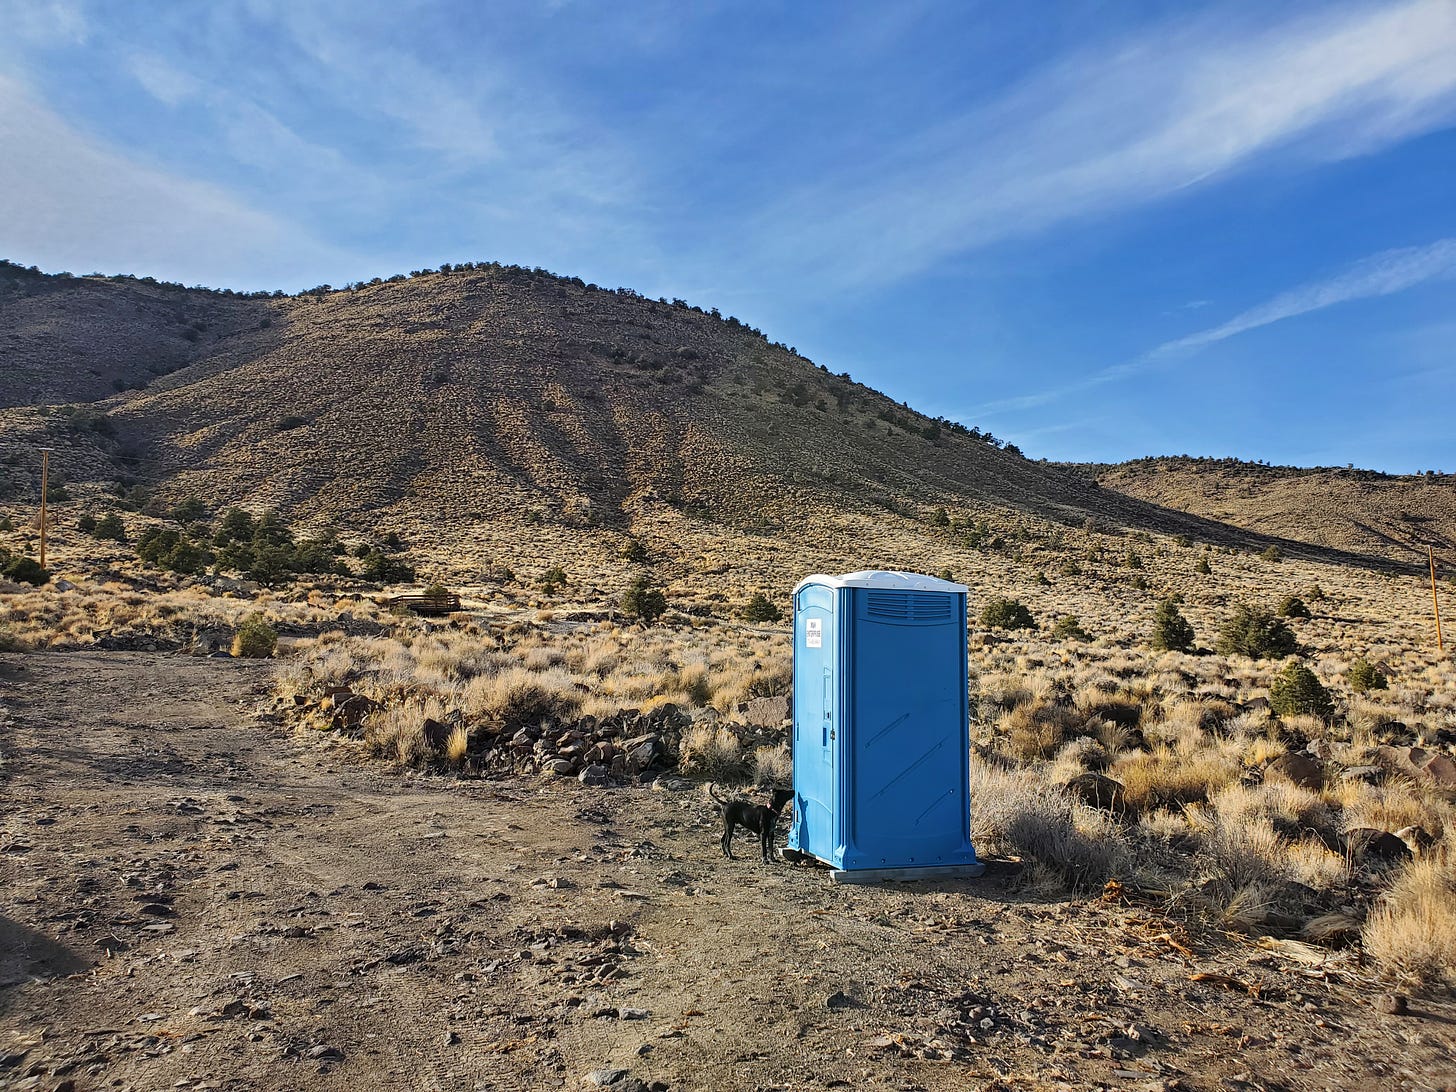 A blue porta potty on a dirt road with a black puppy right outside the door.